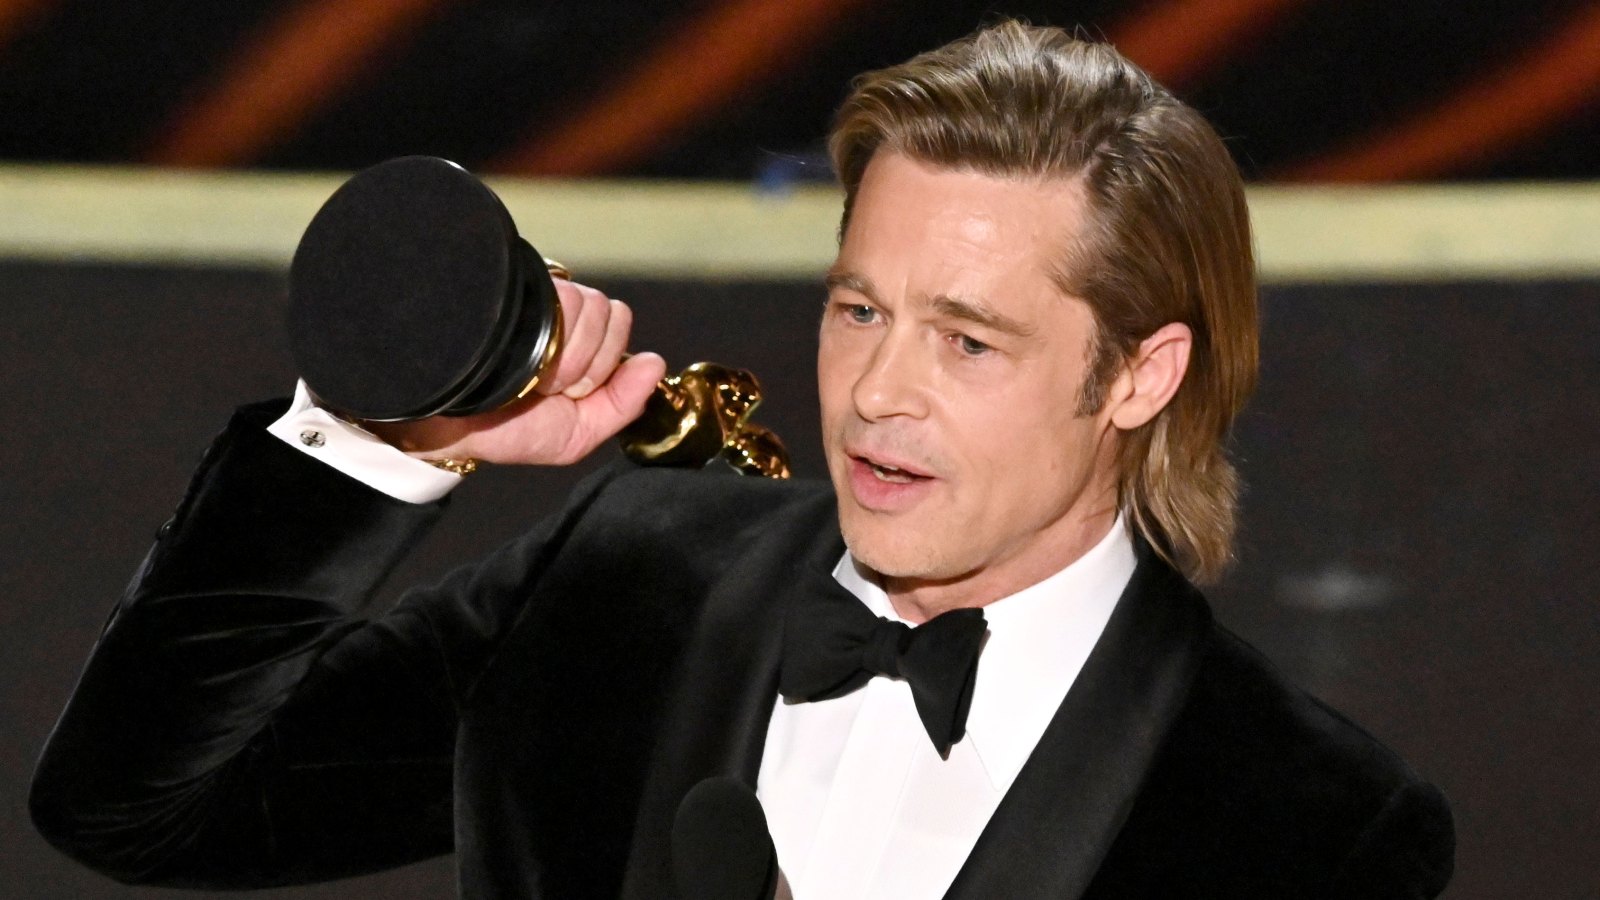 Brad Pitt Says He Put Some Real Work Into His Awards Show Speeches